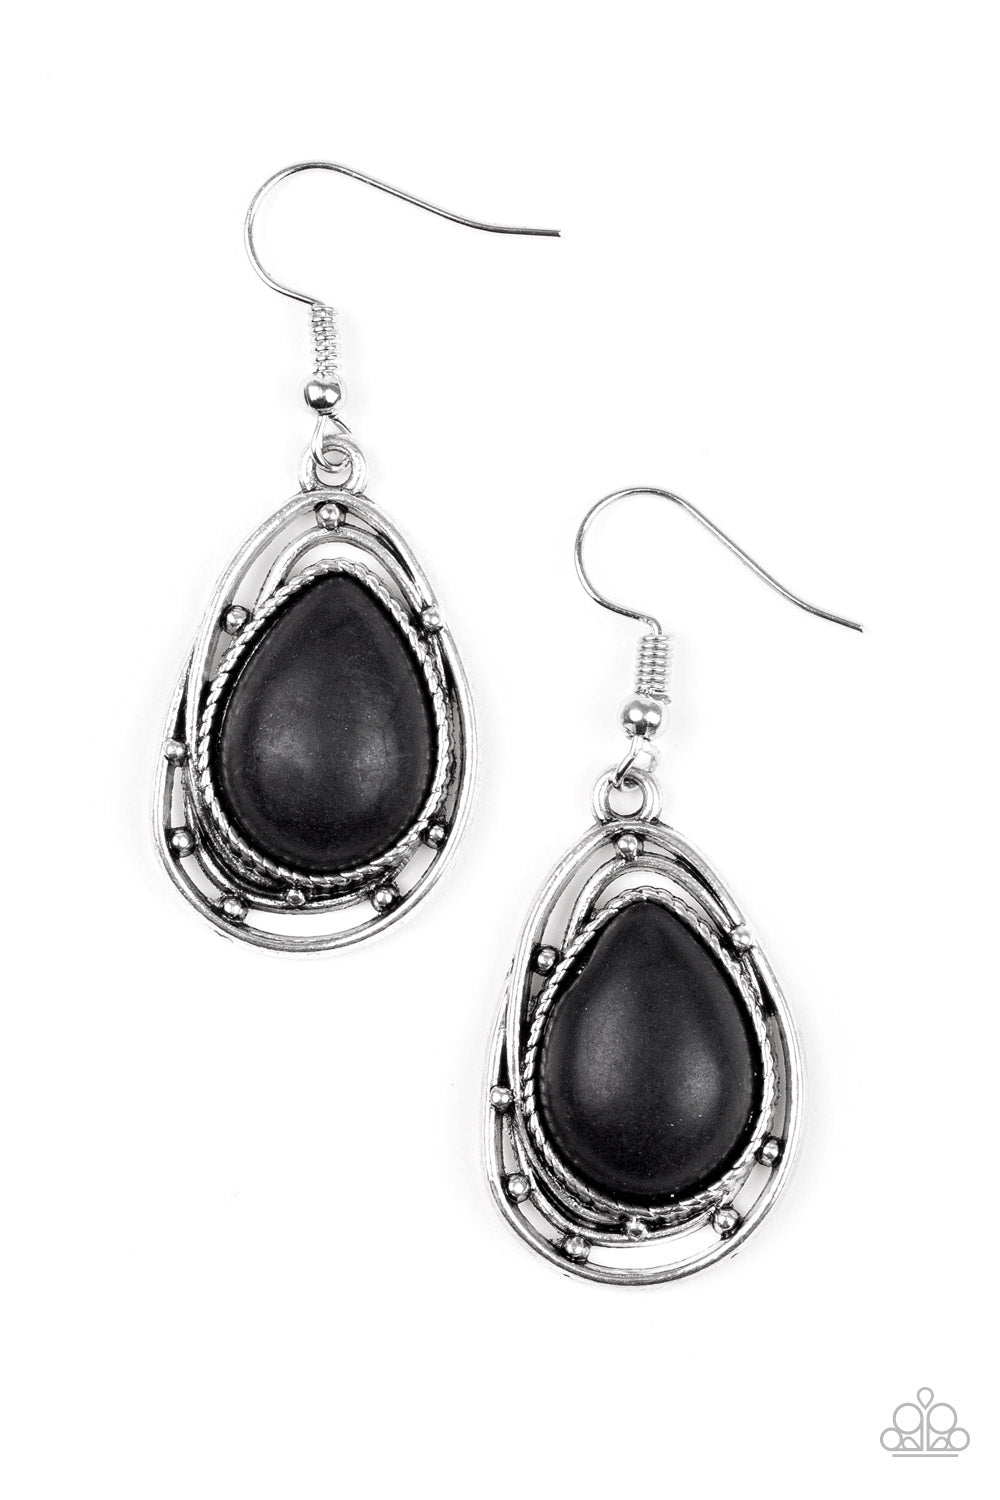 ABSTRACT ANTHROPOLOGY - BLACK POLISHED STONE TEARDROP EARRINGS